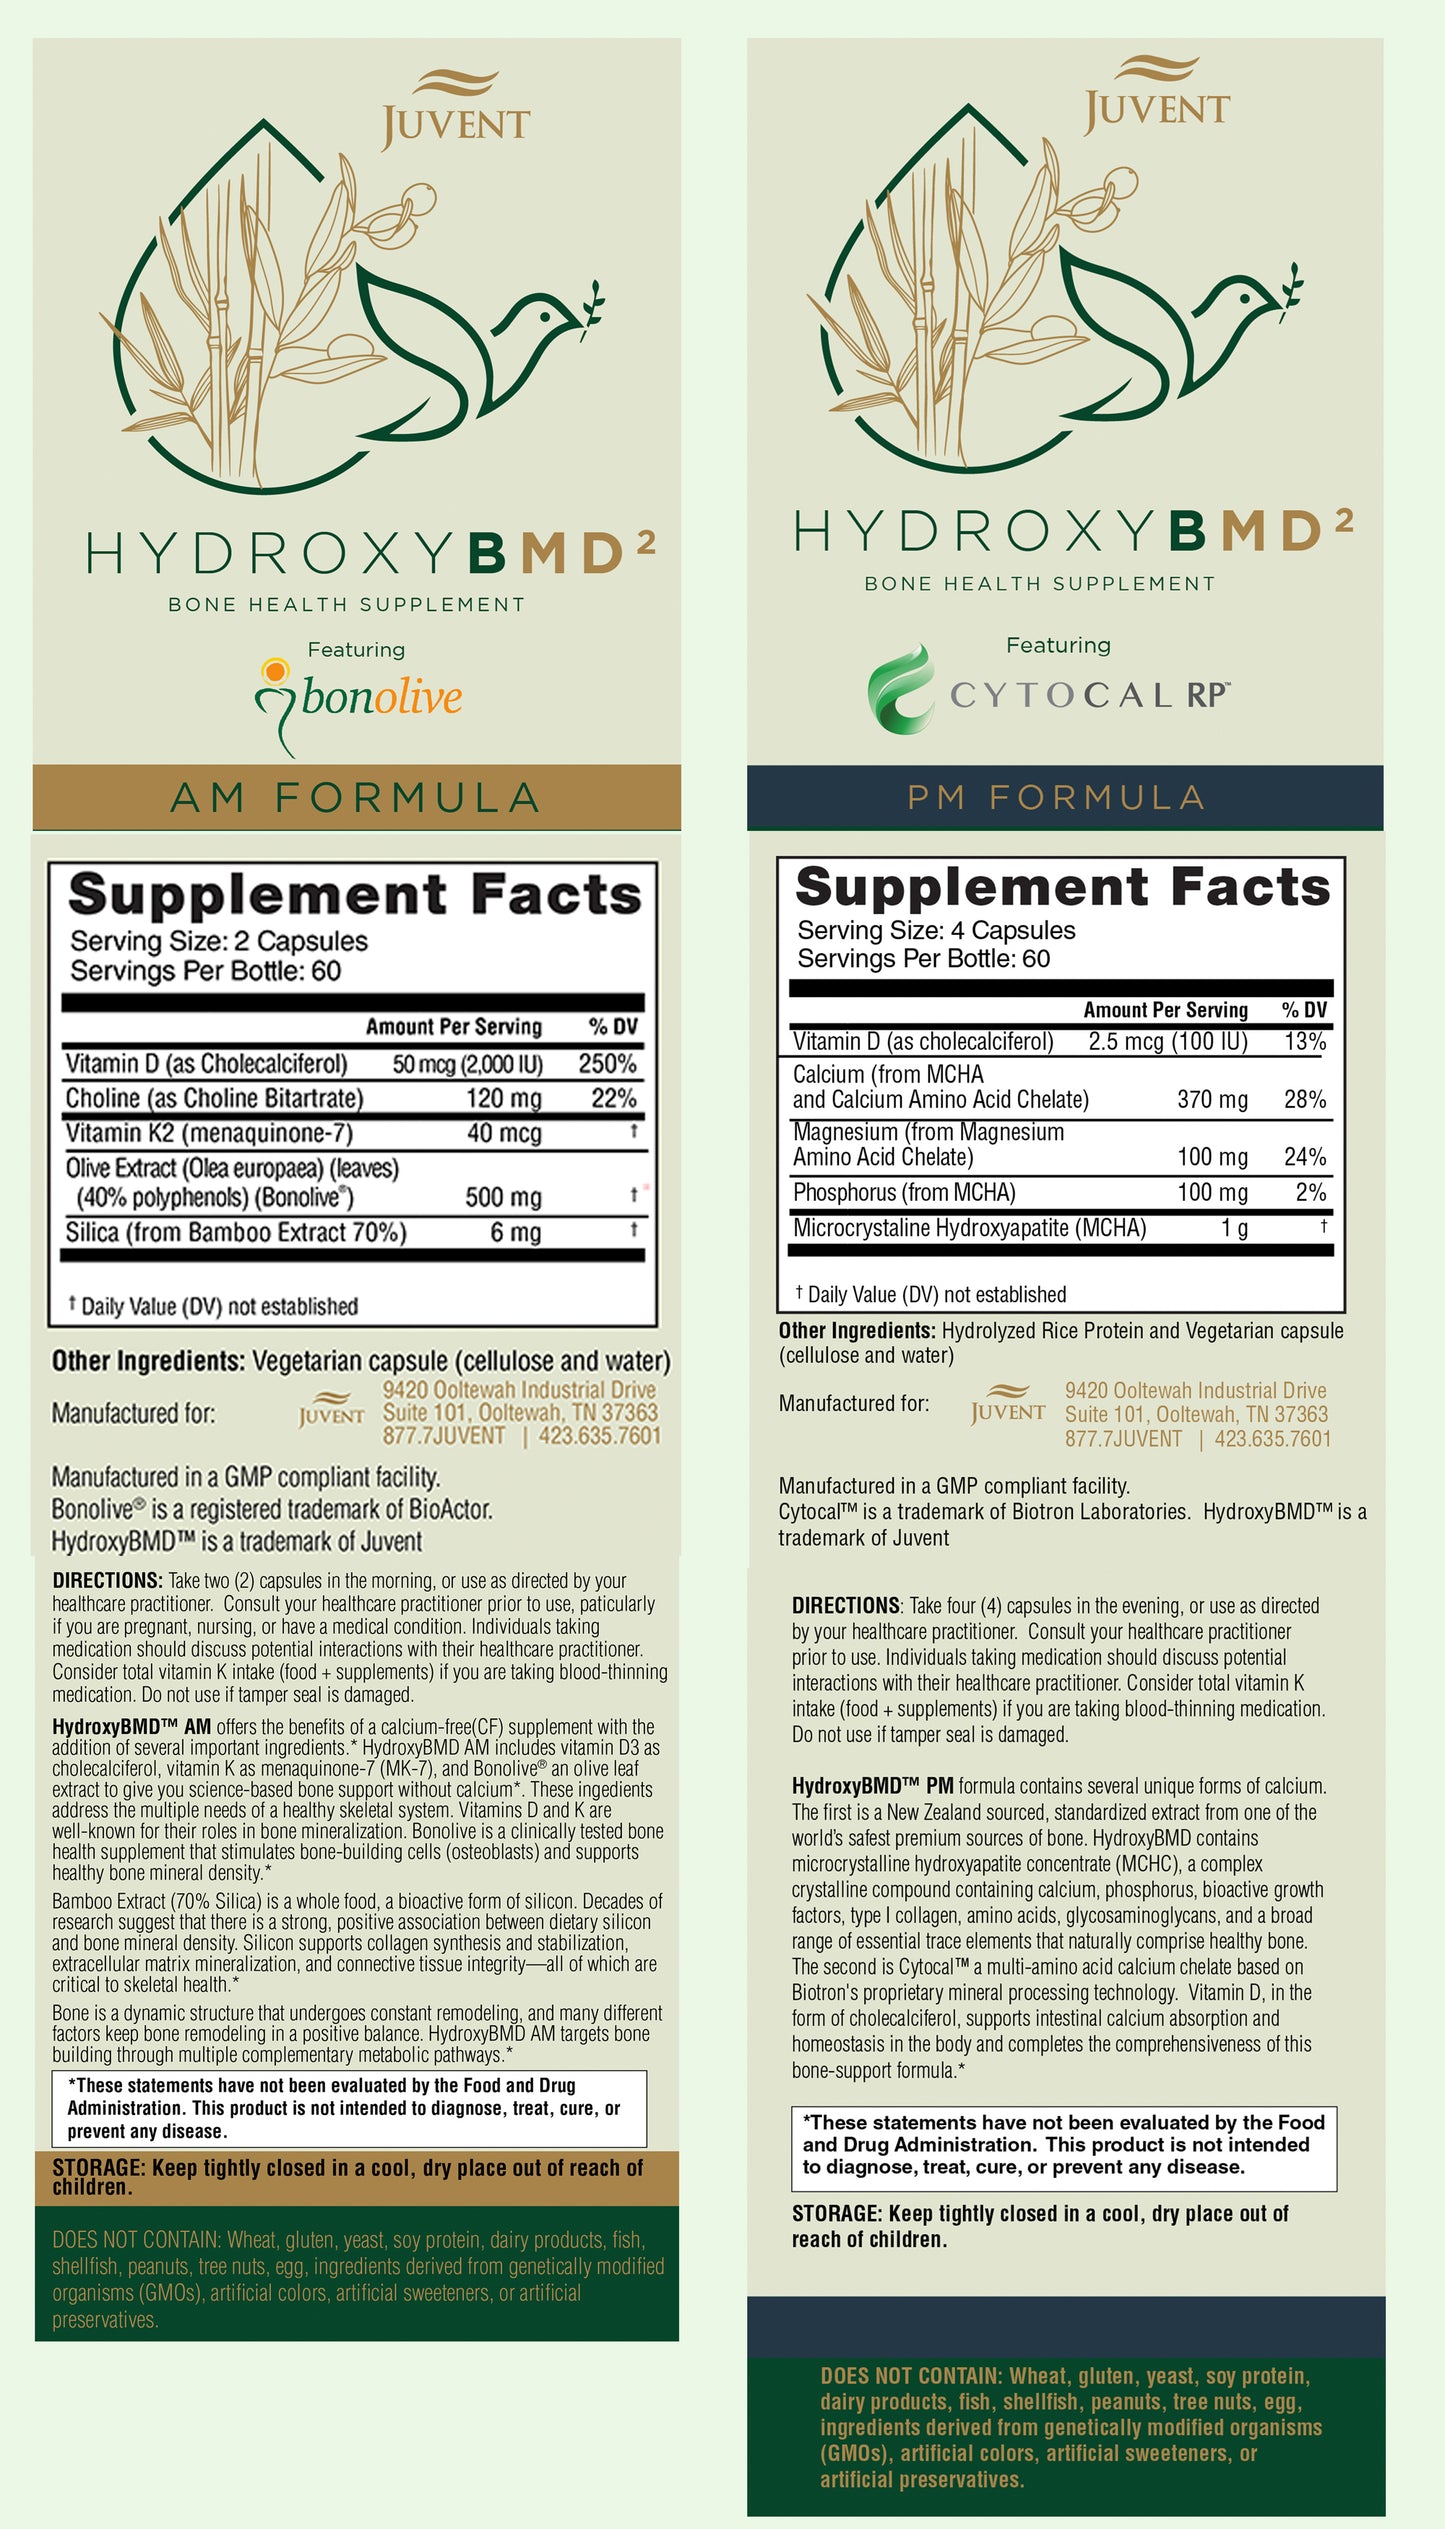 Nutrition facts for the AM and PM Formula of HydroxyBMD squared bone health supplements.